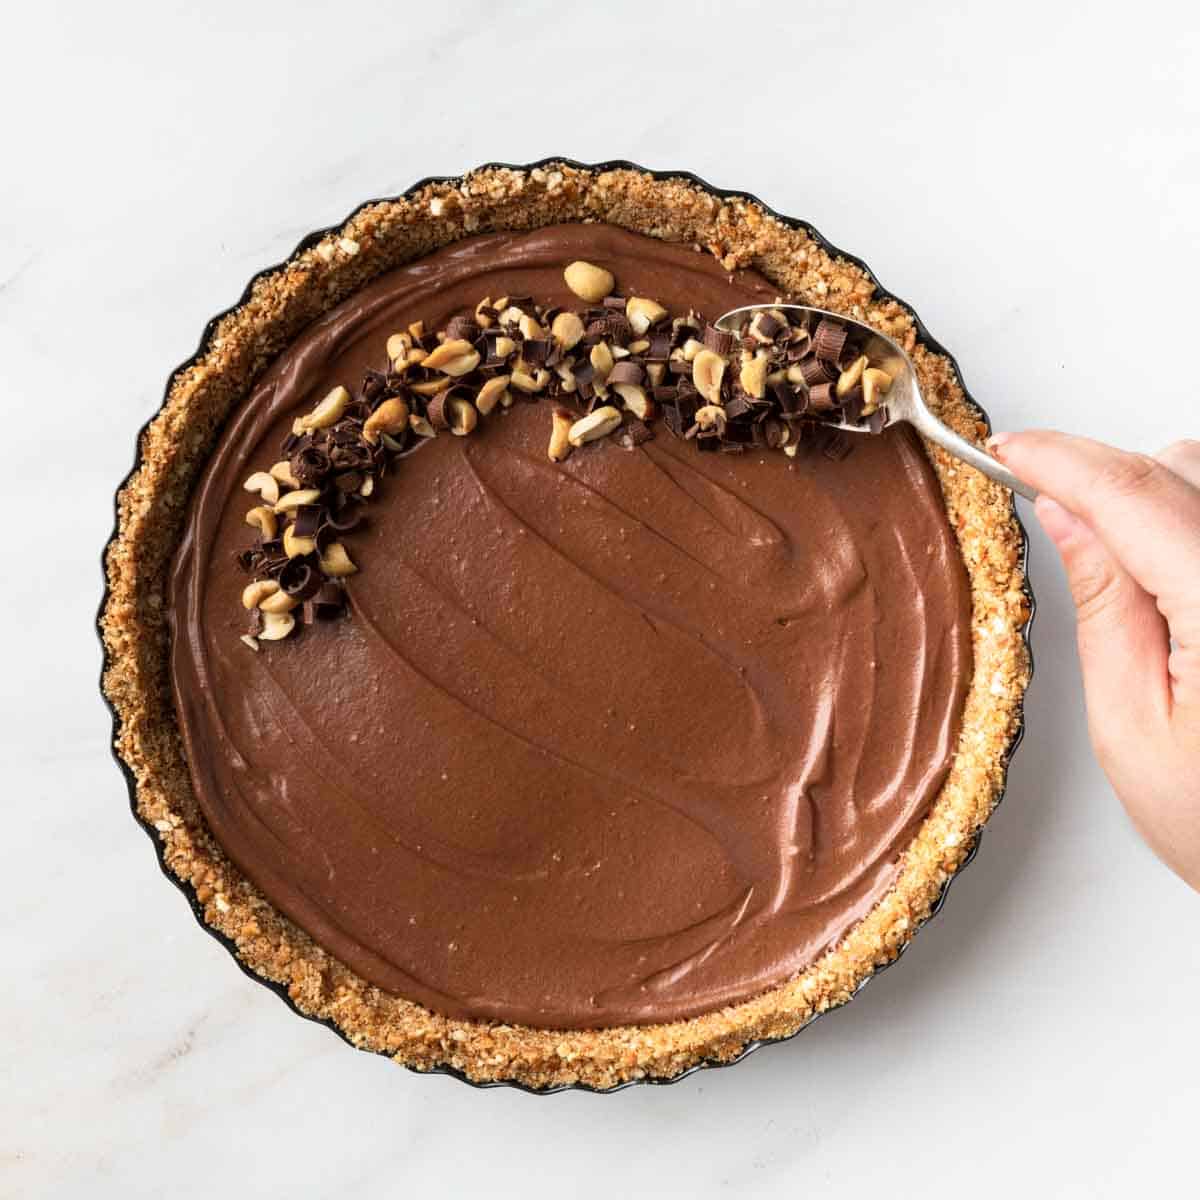 Spooning the roasted peanuts and chocolate curls over the top of the pie